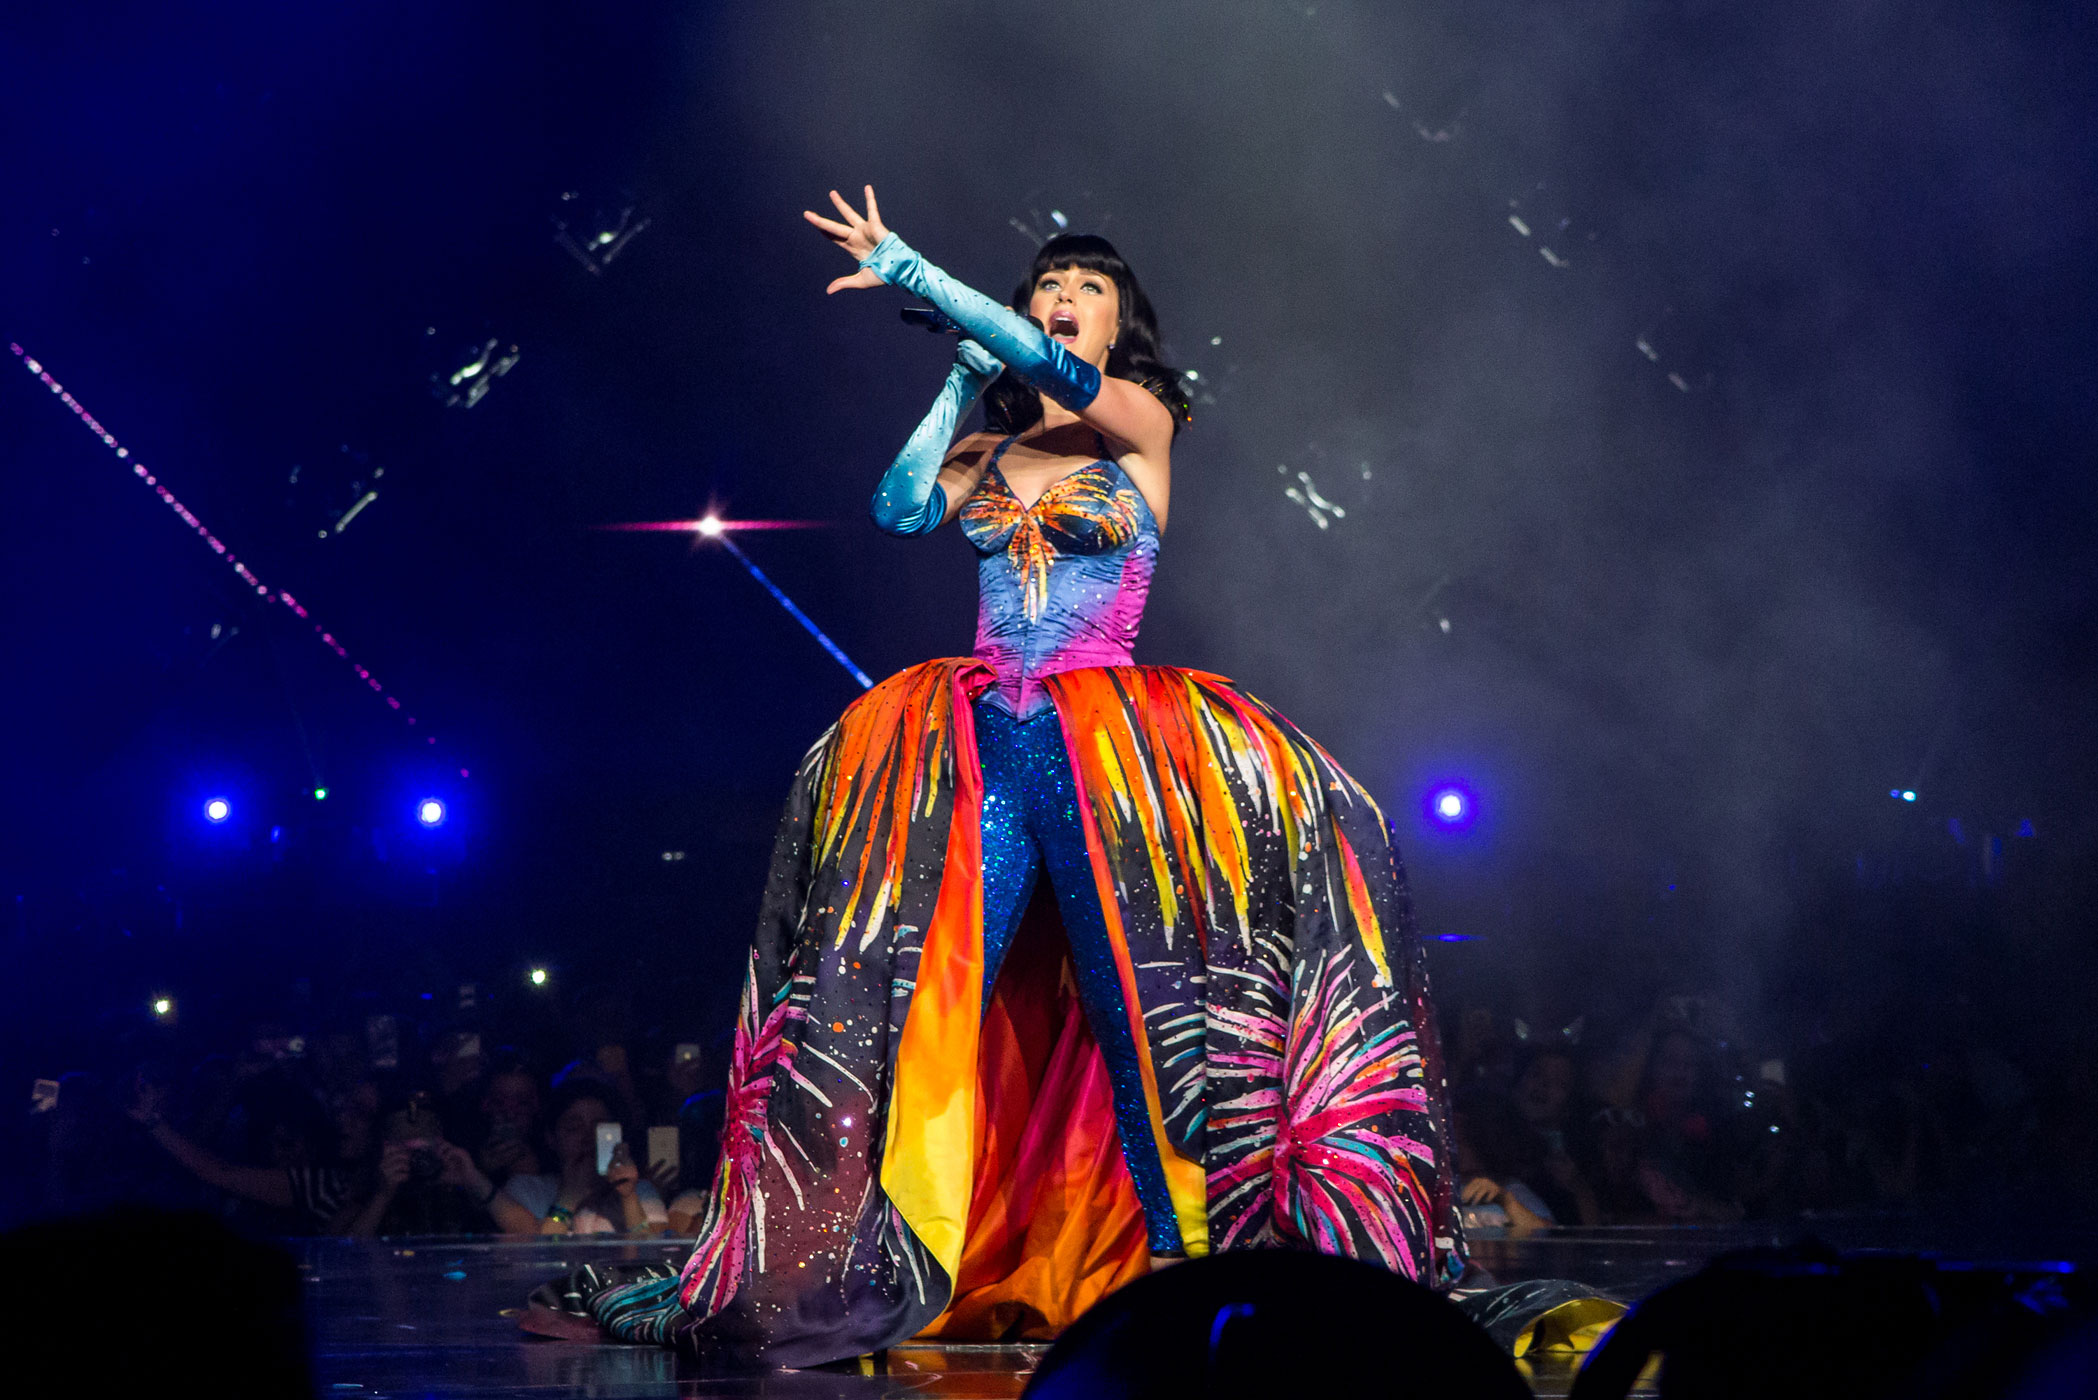 Katy Perry performs in Los Angeles - Full Show